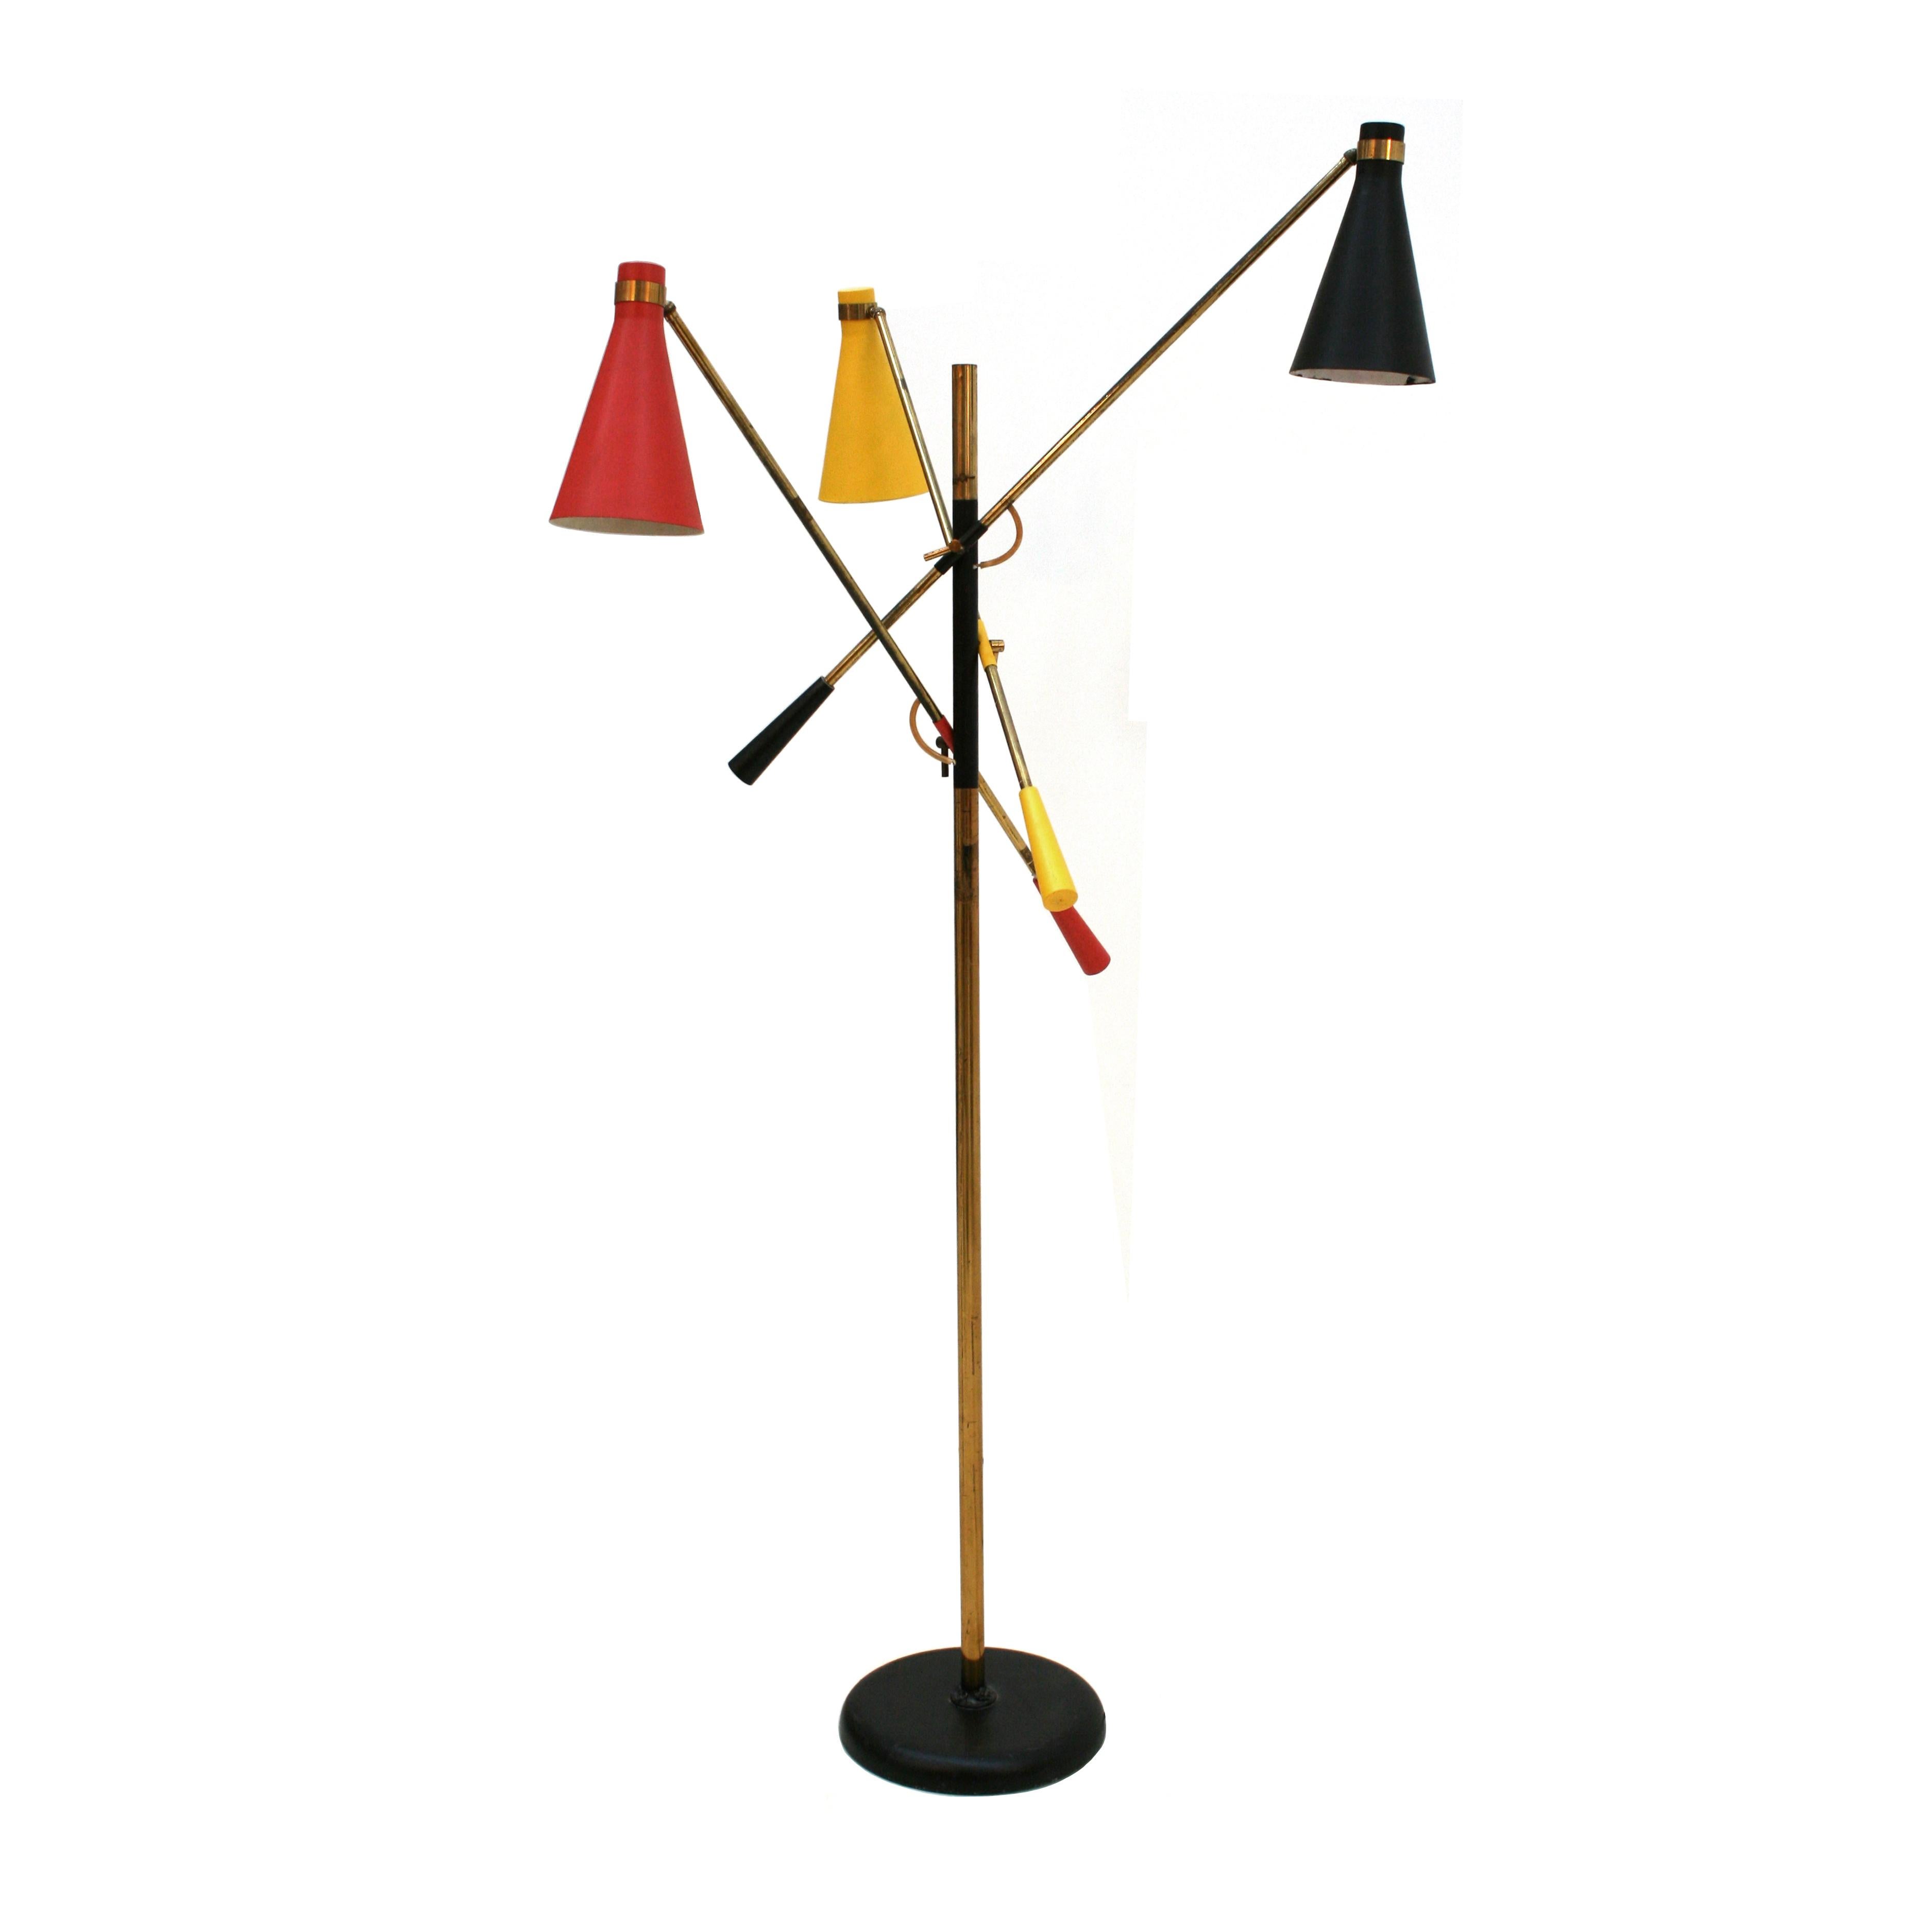 Floor lamp designed by Oscar Torlasco (1934-2004). Structure made of brass composed of three arms and adjustable colored cups.

Oscar Torlasco was an Italian lighting designer who worked for Esperia, Stilkronen and Lumi.
His style ranged from